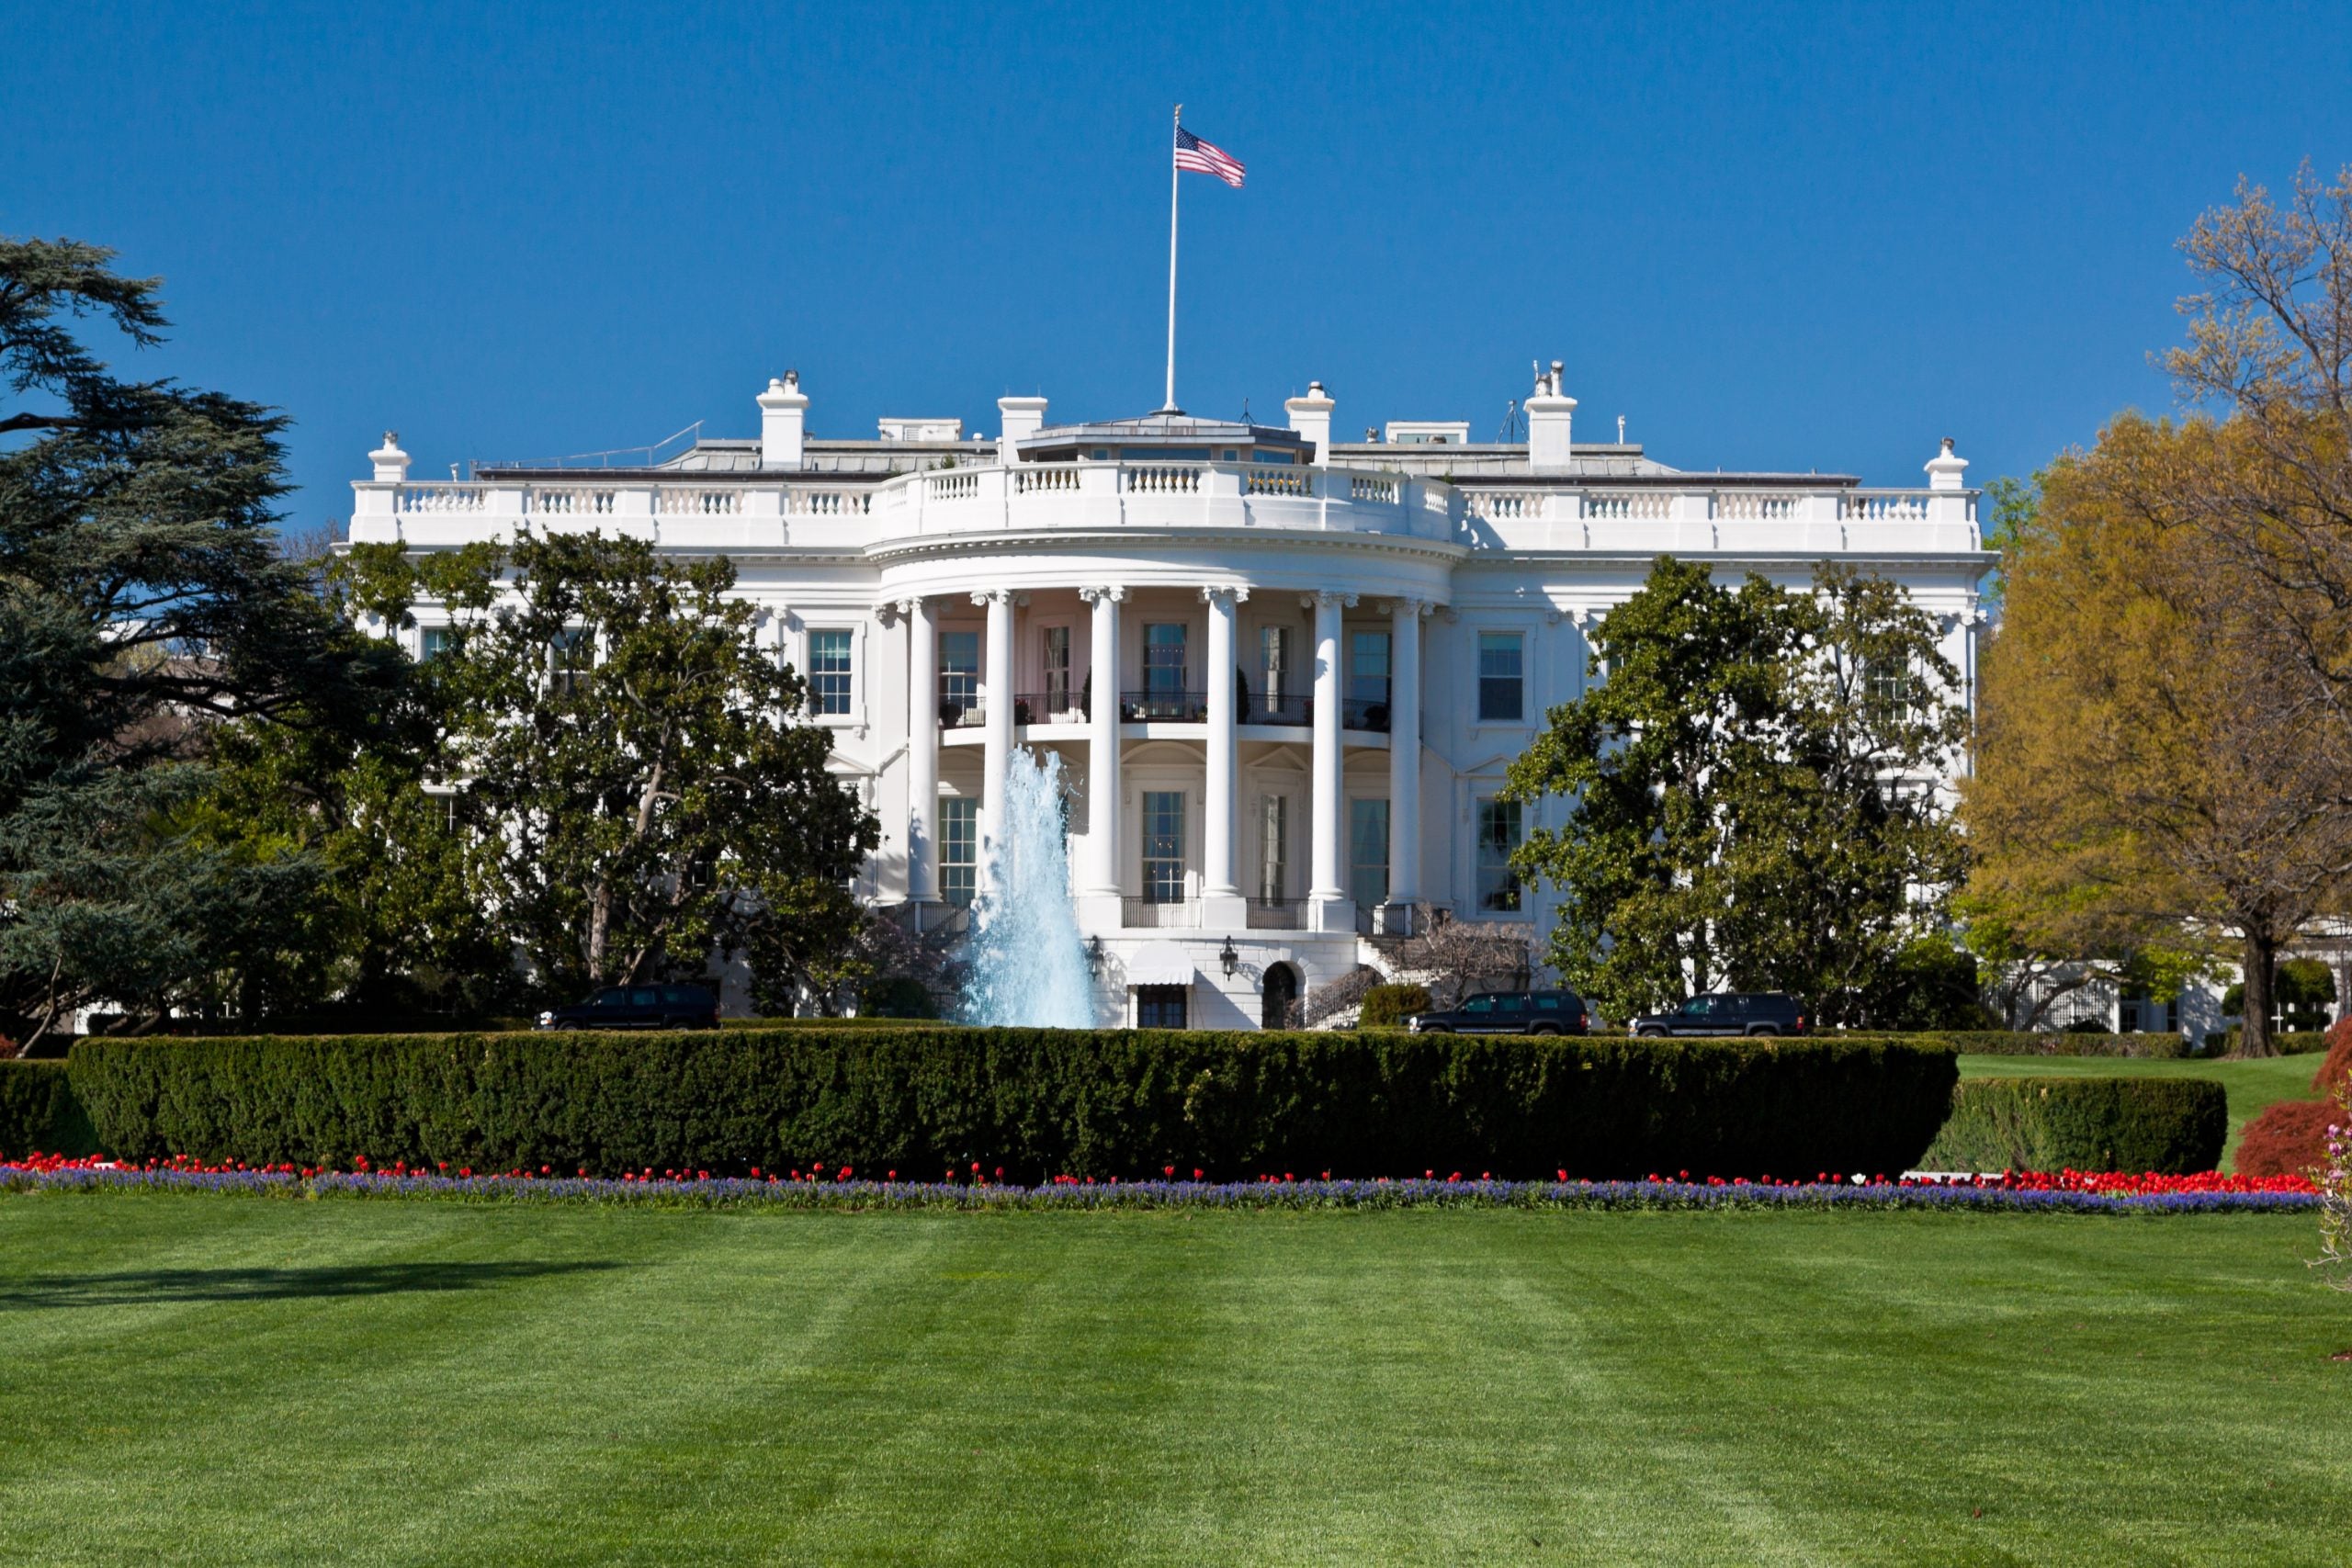 Secret Service Launches Investigation After Cocaine Found At The White House